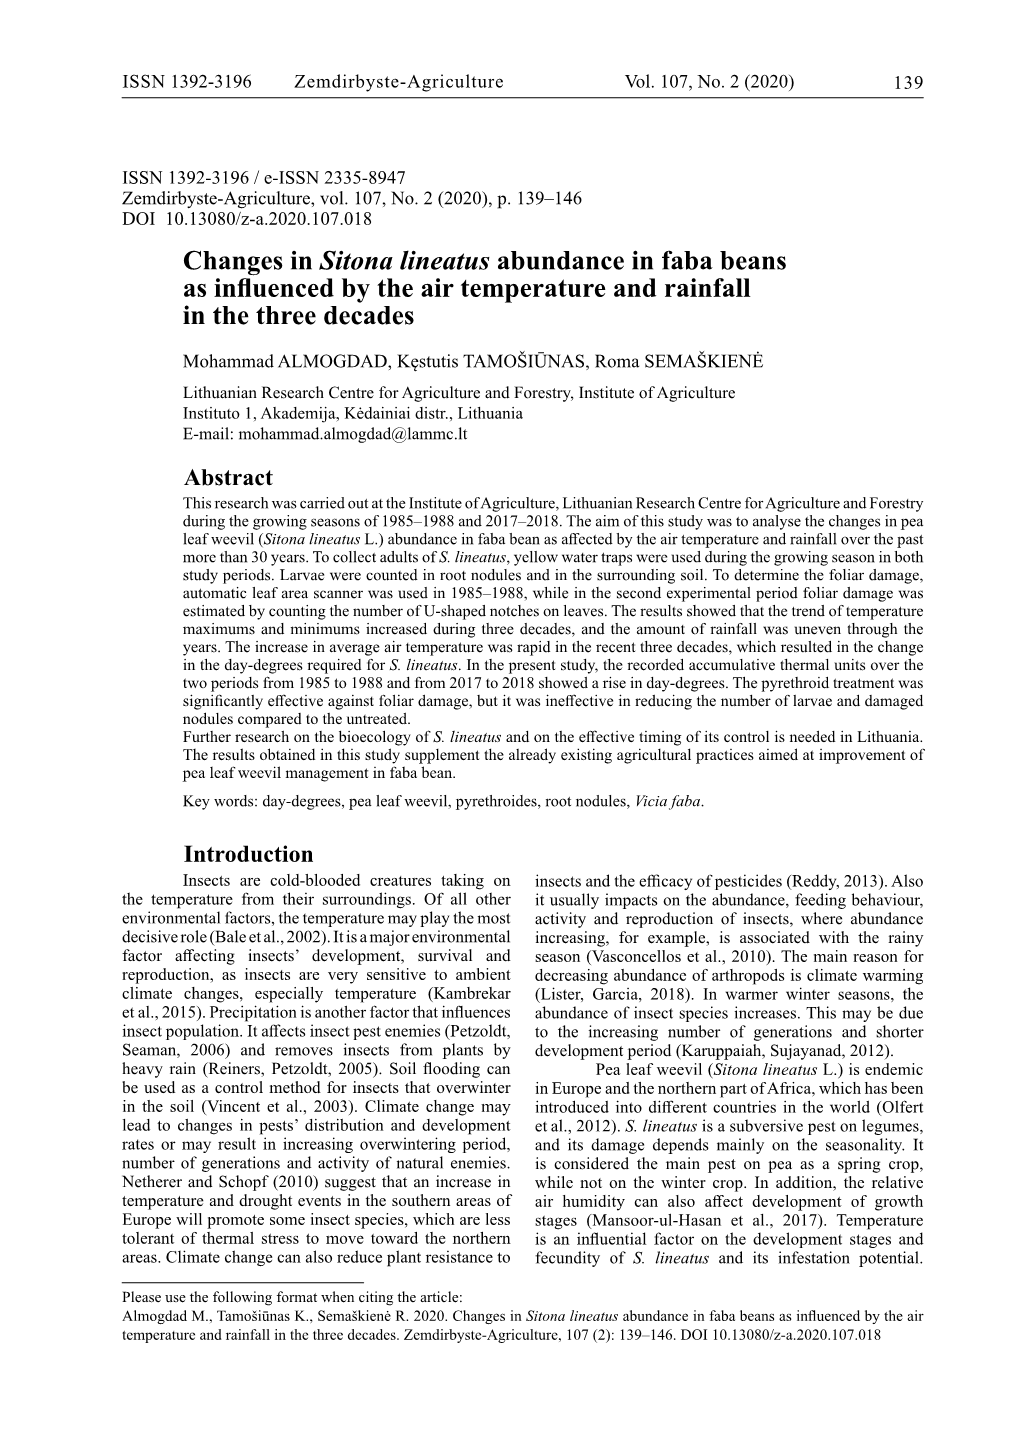 Changes in Sitona Lineatus Abundance in Faba Beans As Influenced by the Air Temperature and Rainfall in the Three Decades